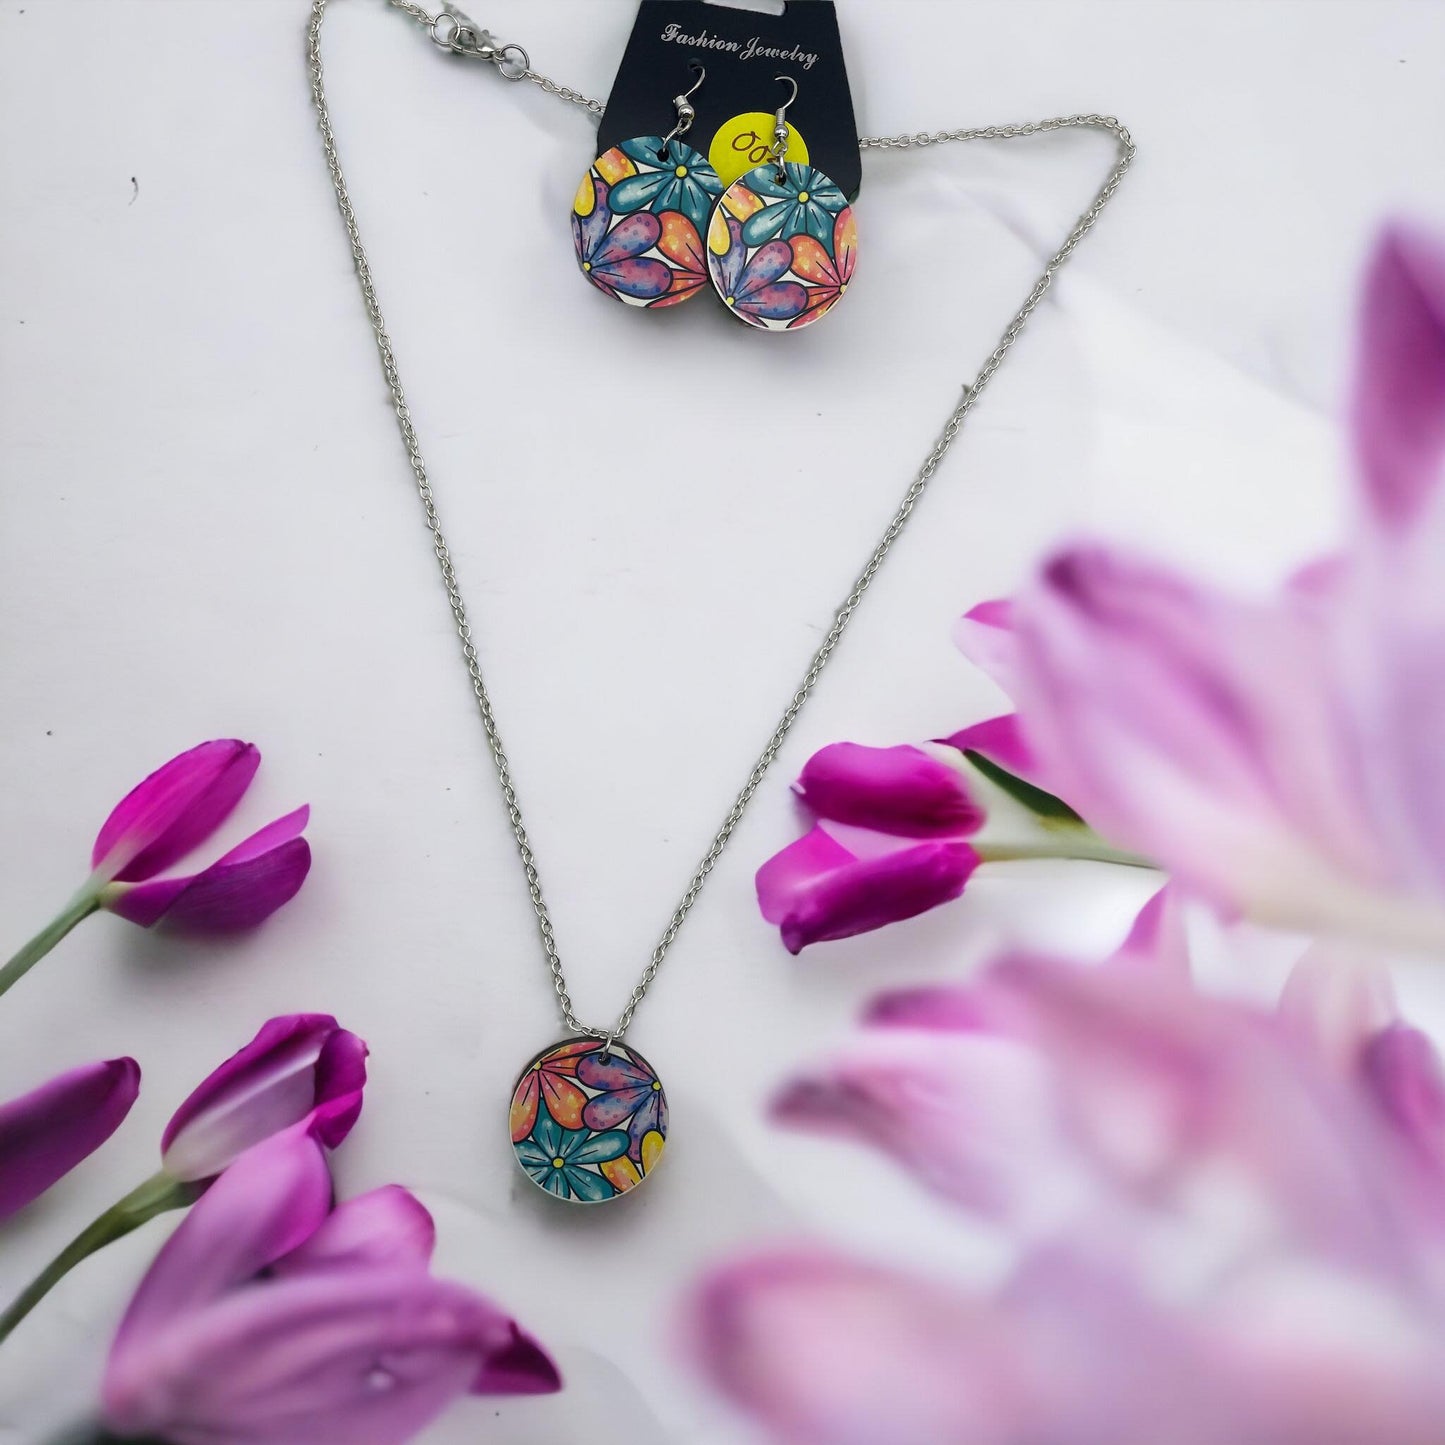 Handmade Sublimation Floral Necklace and Earrings Set